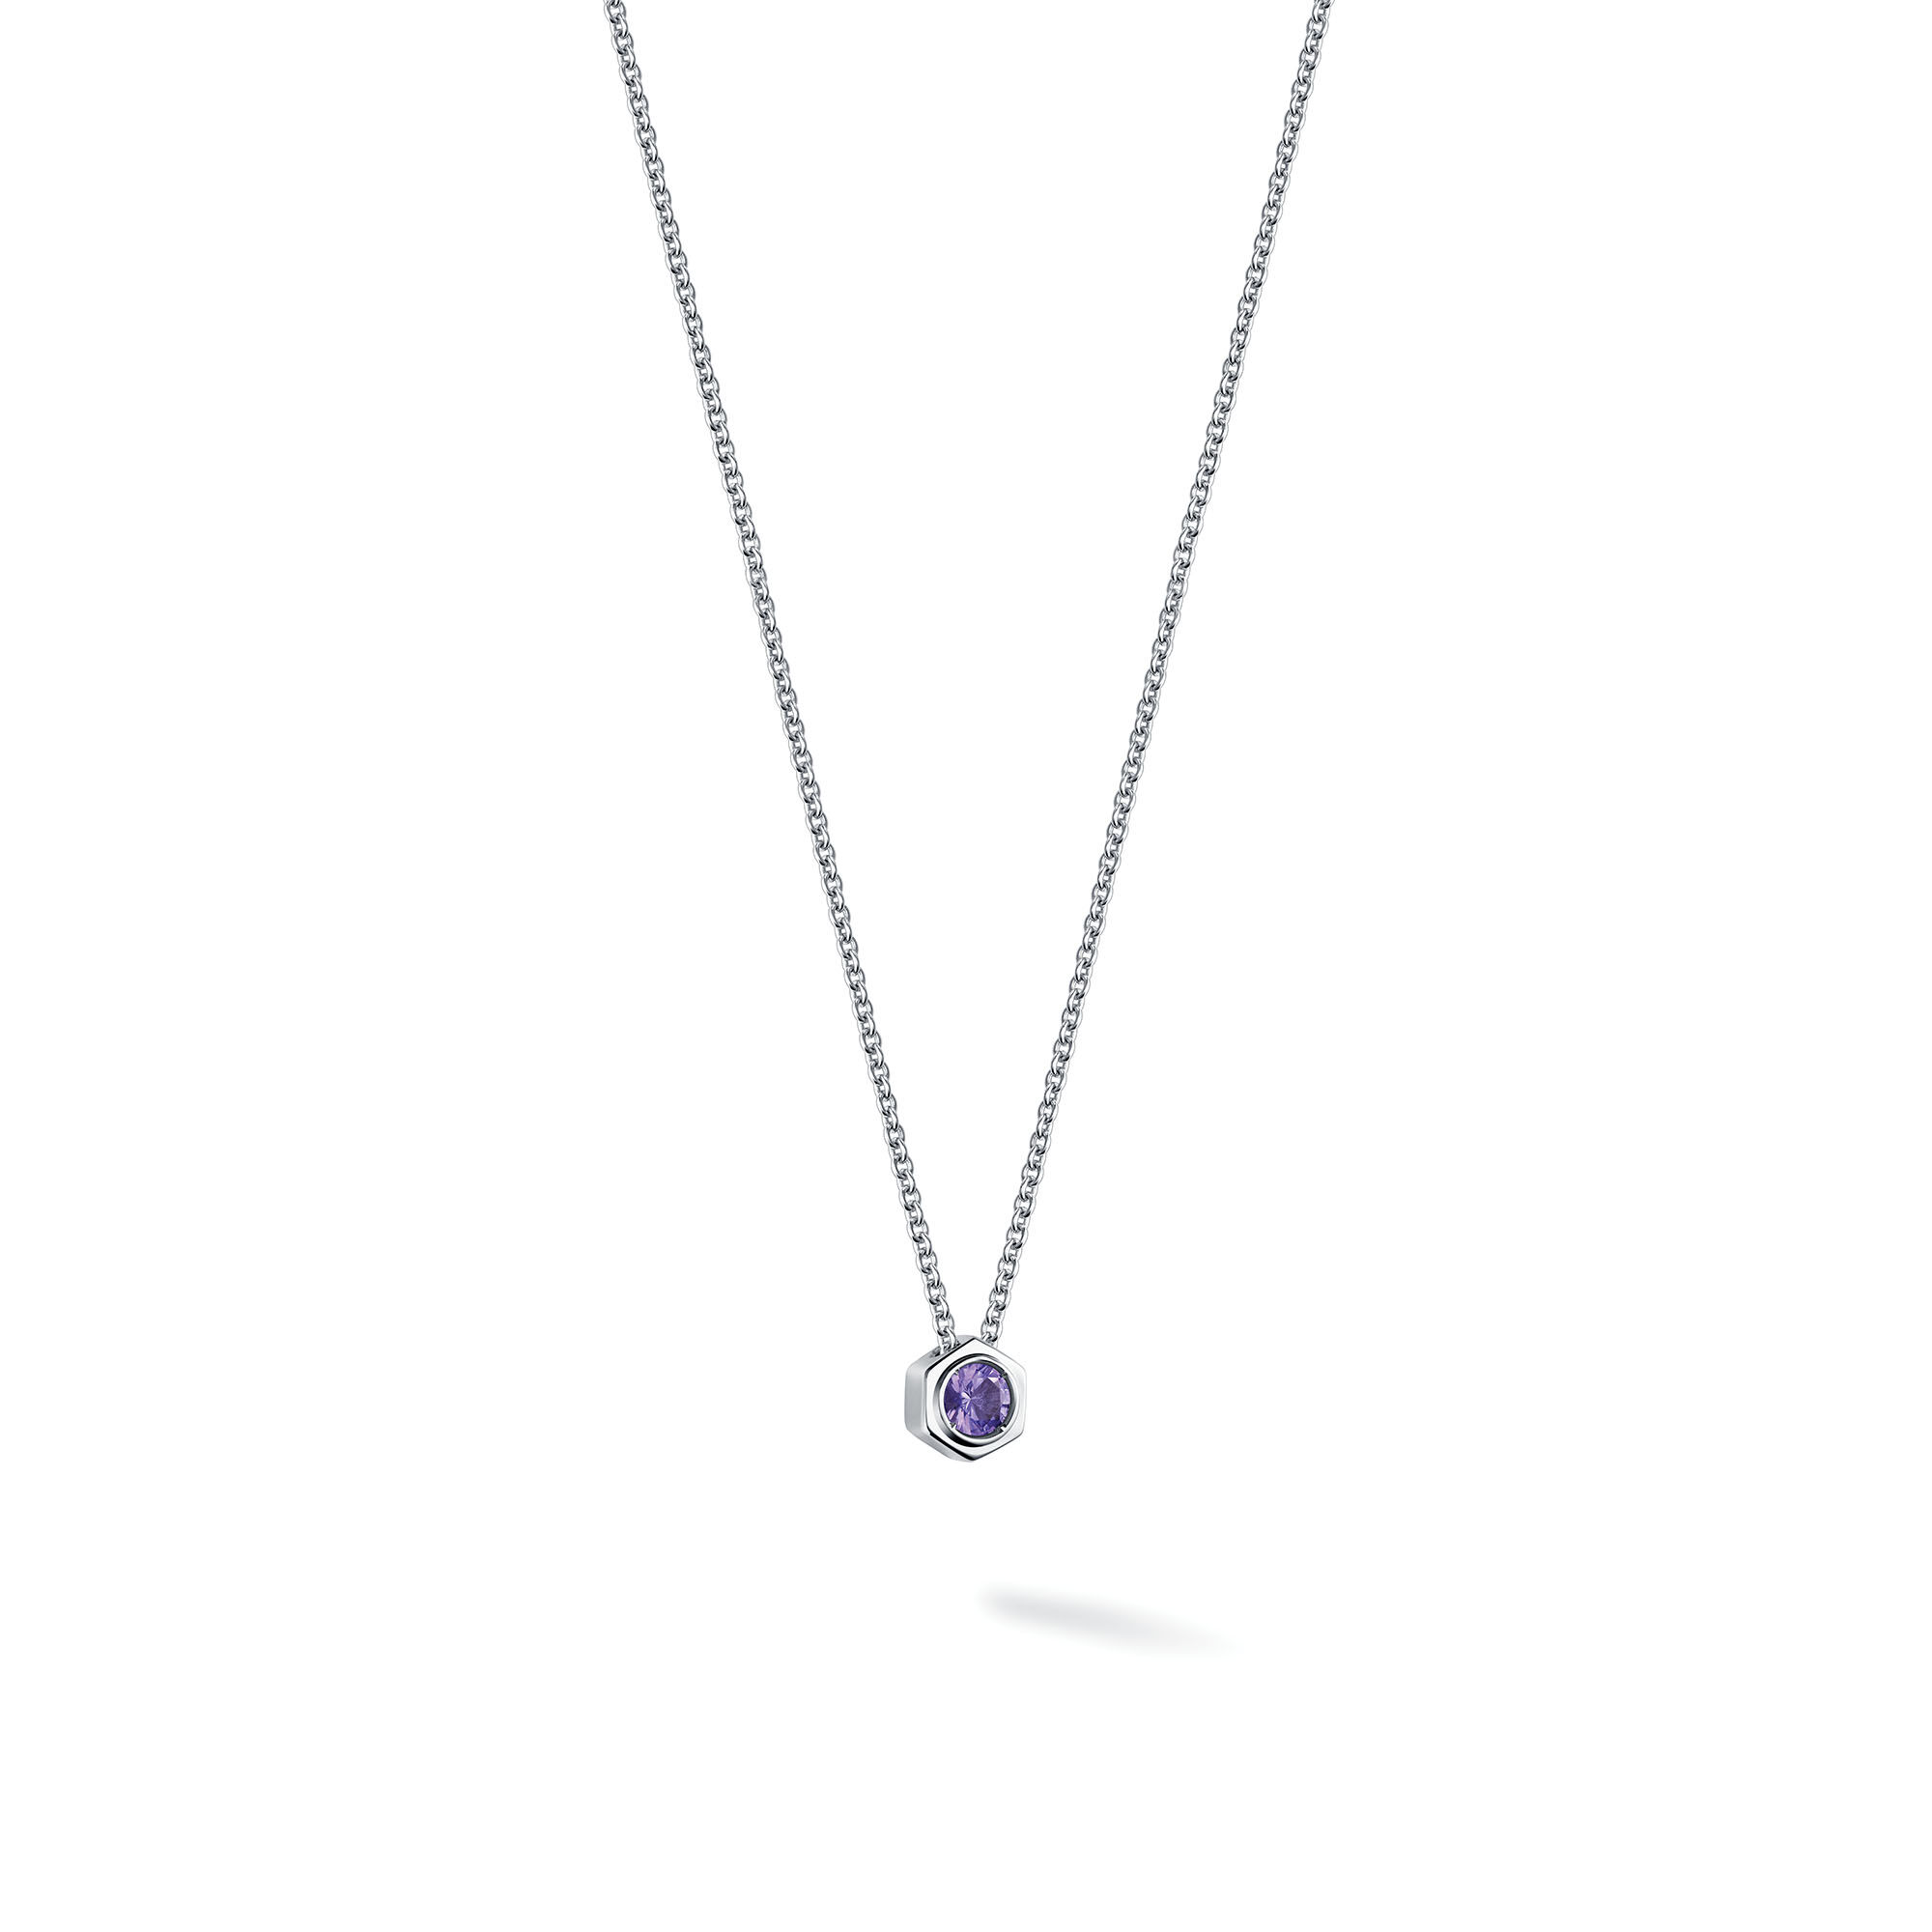 Amethyst and Silver Necklace | Birks Bee Chic